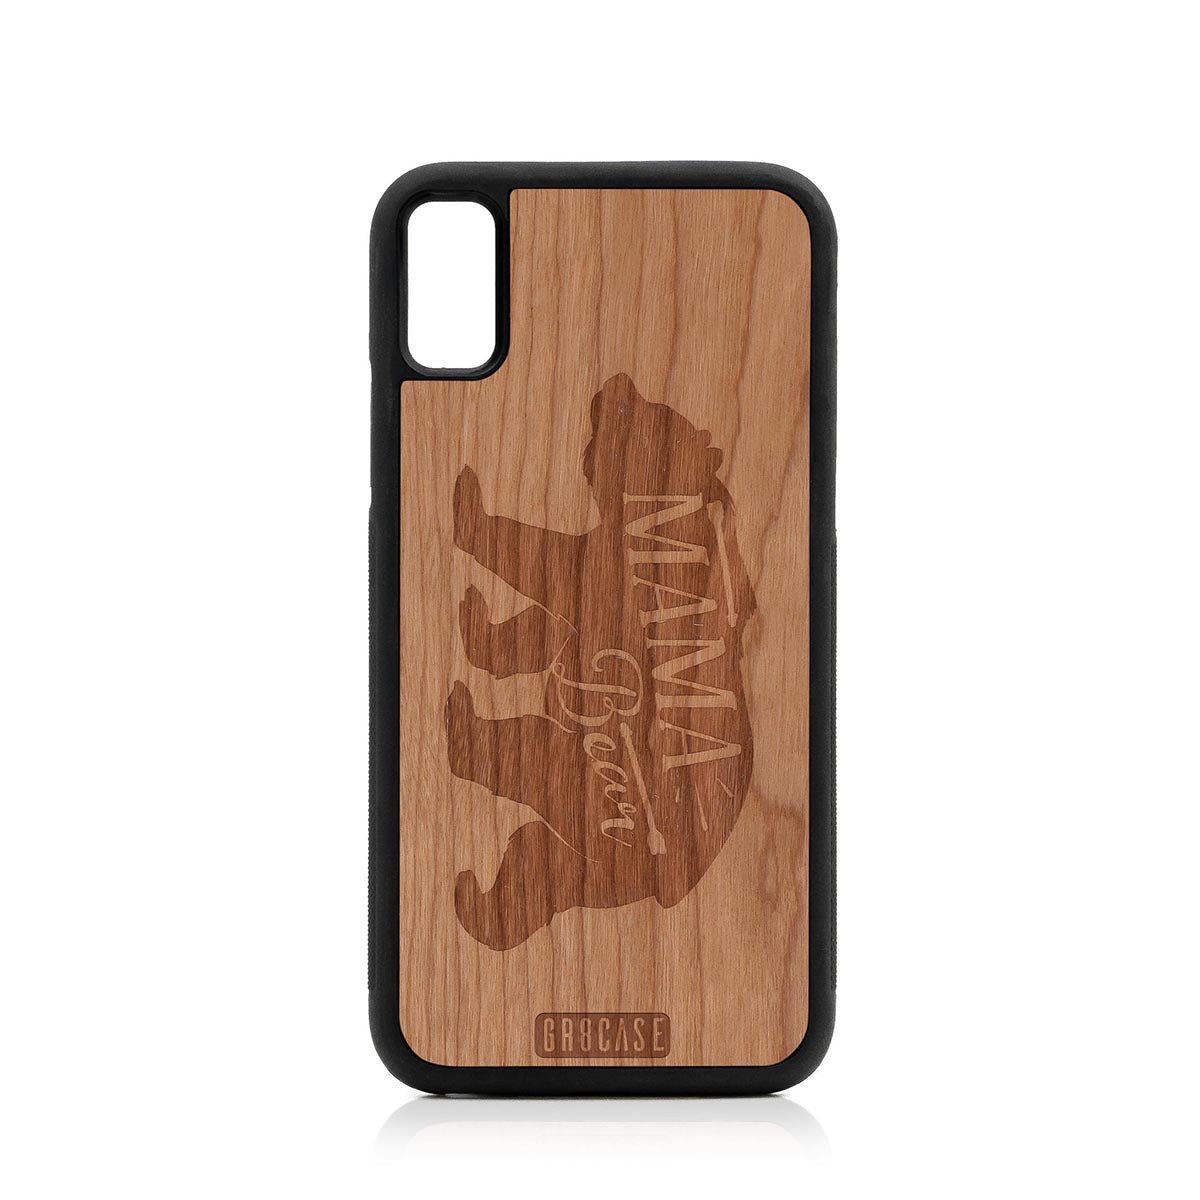 Mama Bear Design Wood Case For iPhone XR by GR8CASE